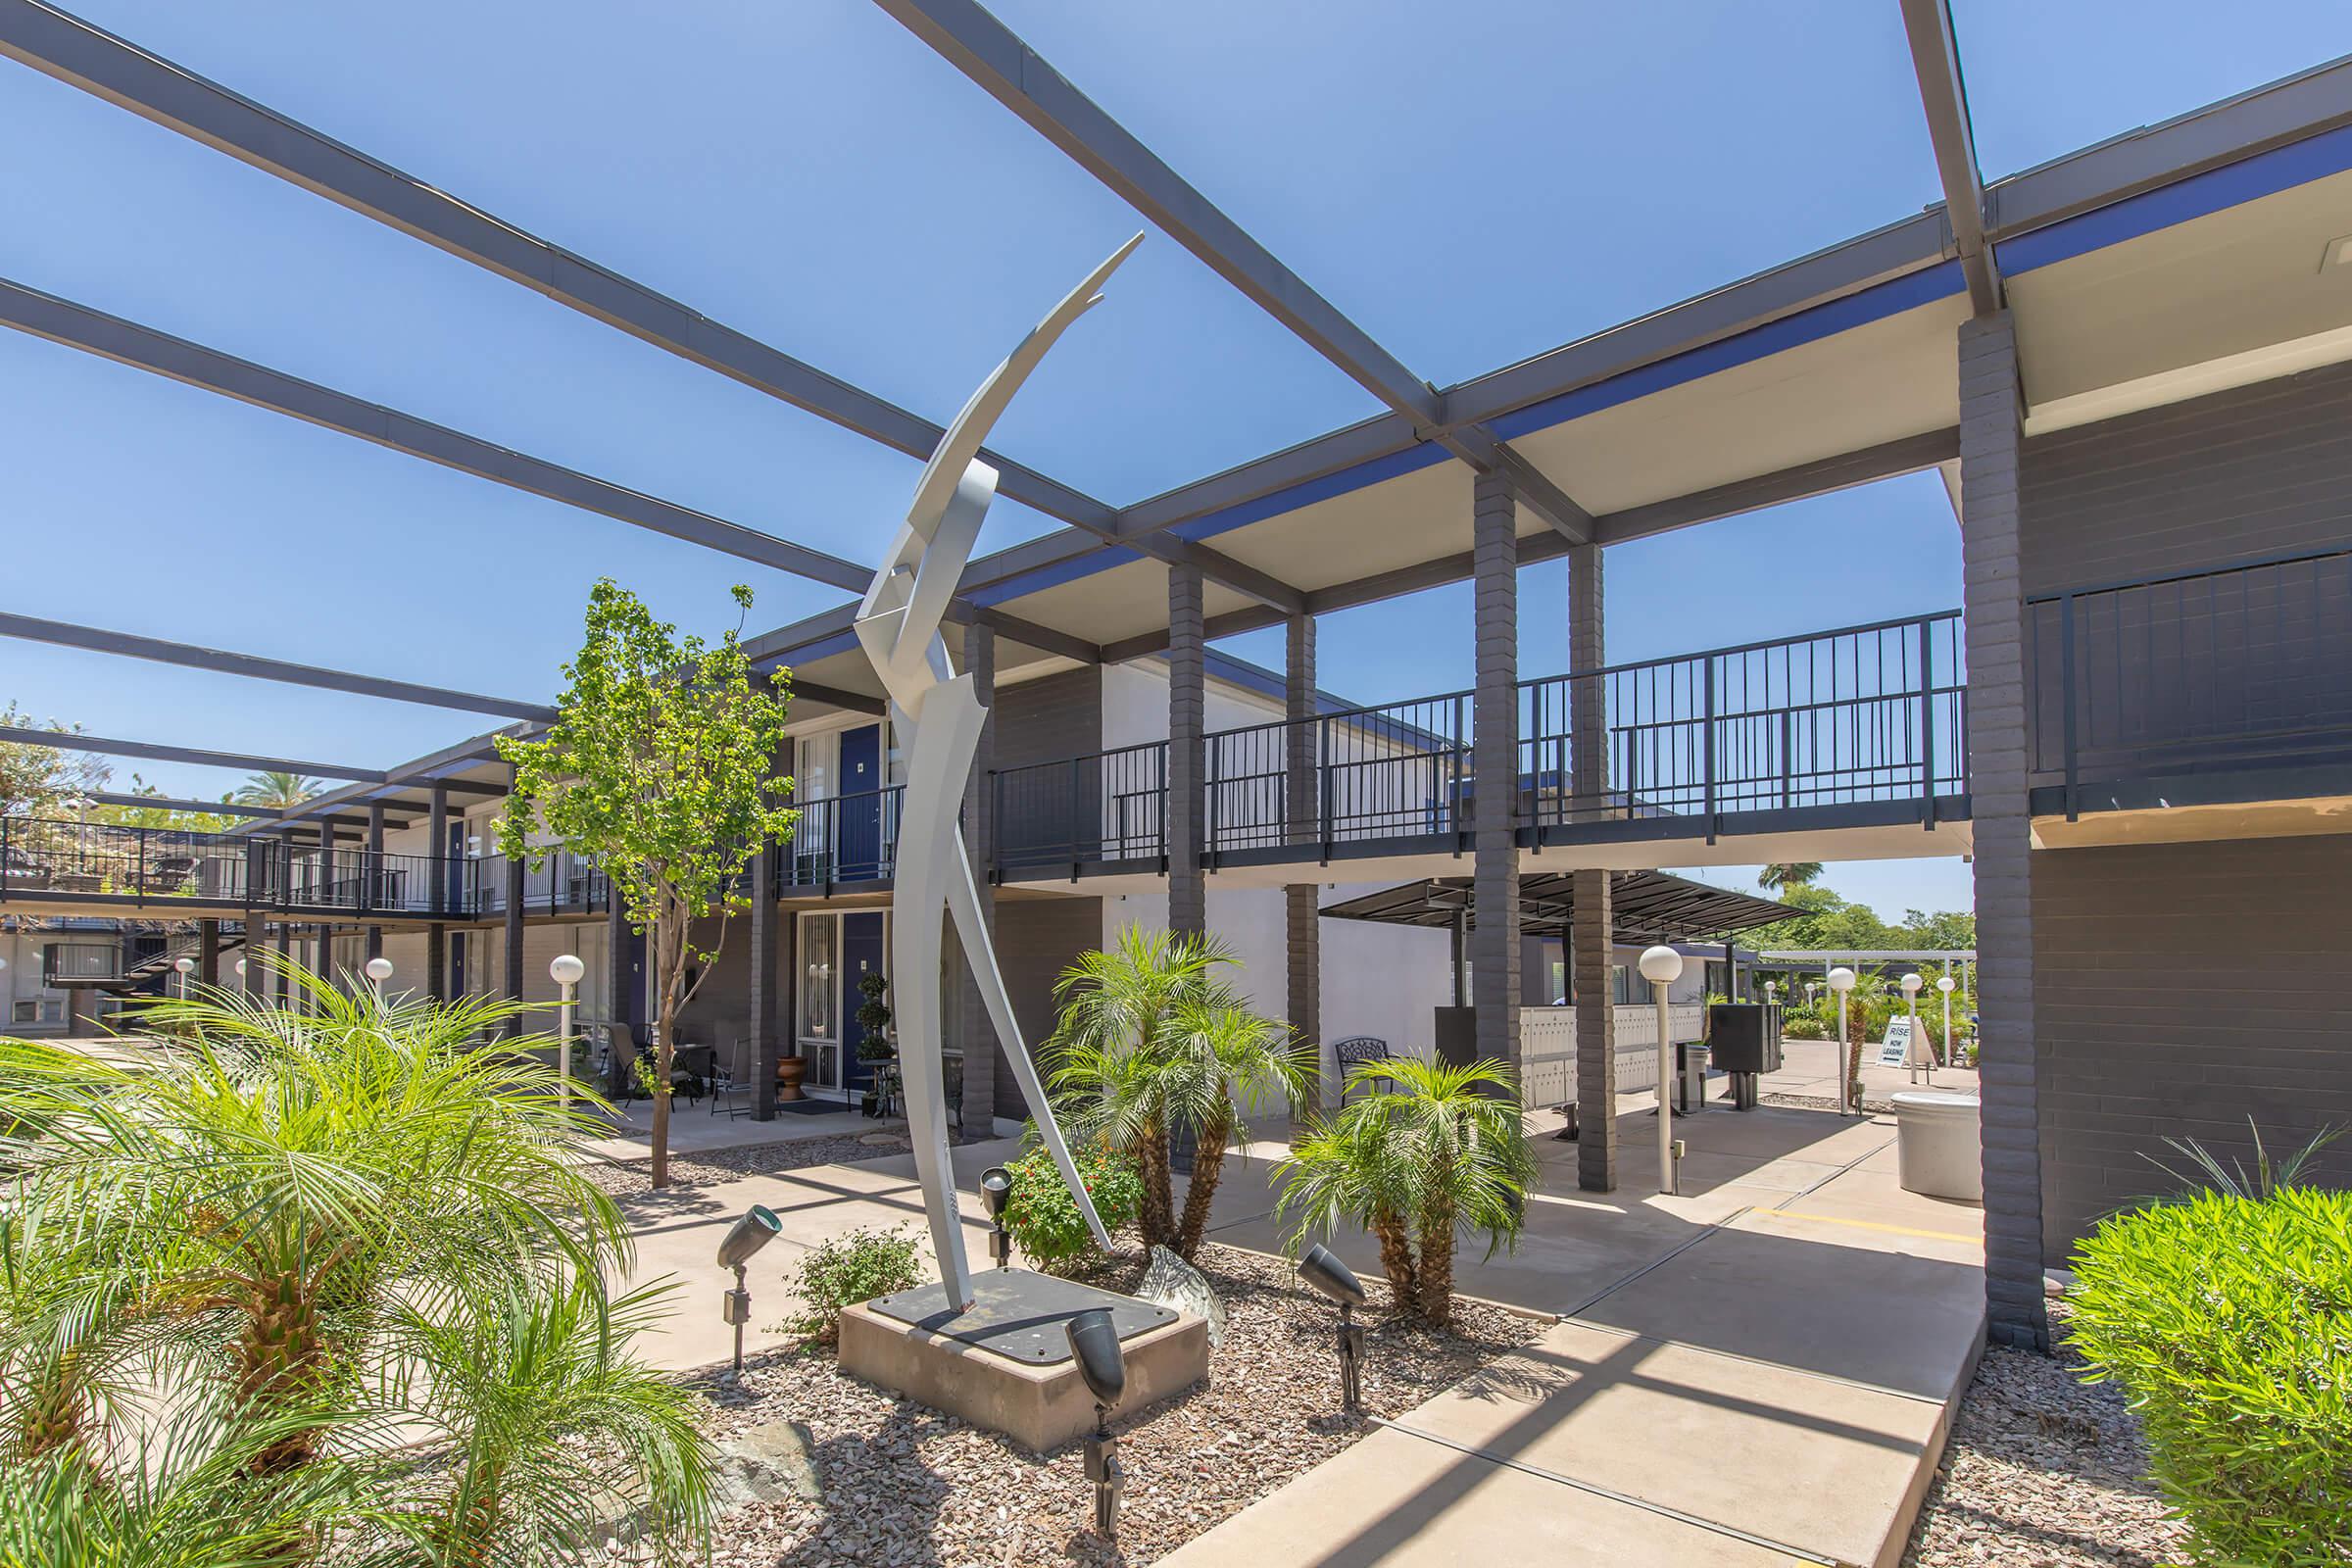 Outdoor modern art sculpture surrounded by aRise Biltmore apartment complex walkway and overhead beams